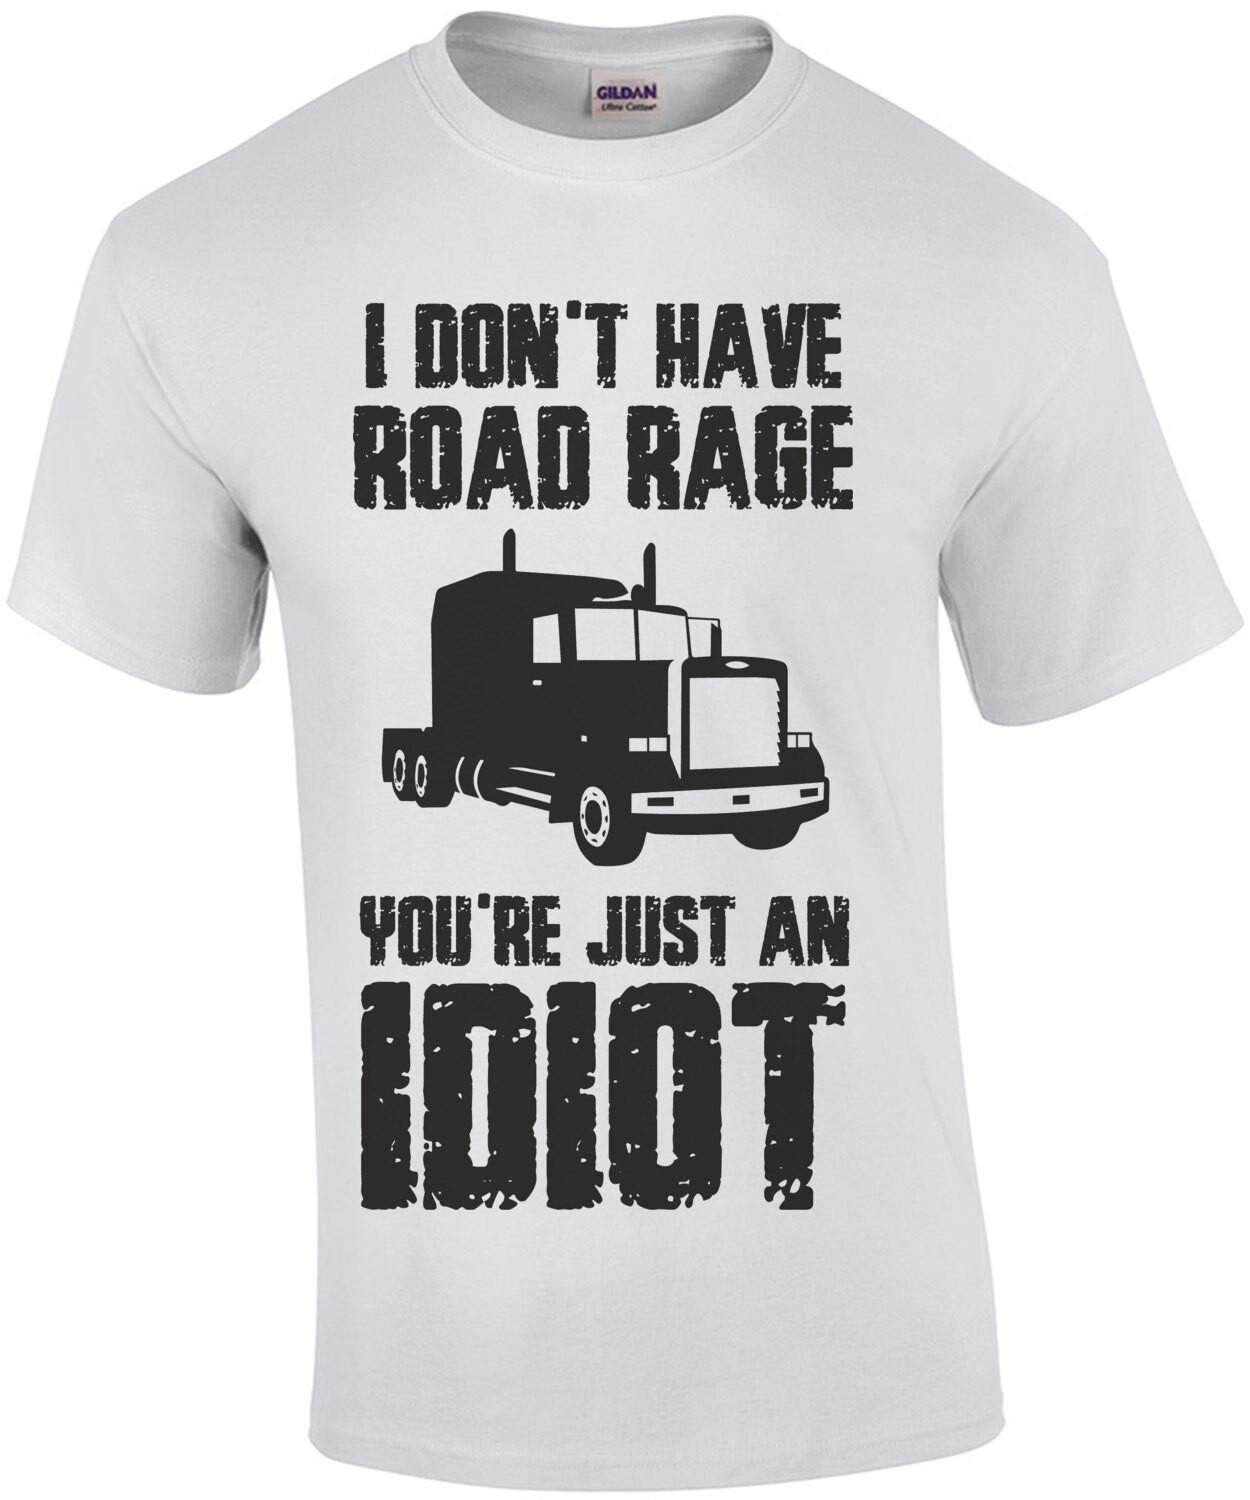 I don't have road rage you're just an idiot - funny t-shirt